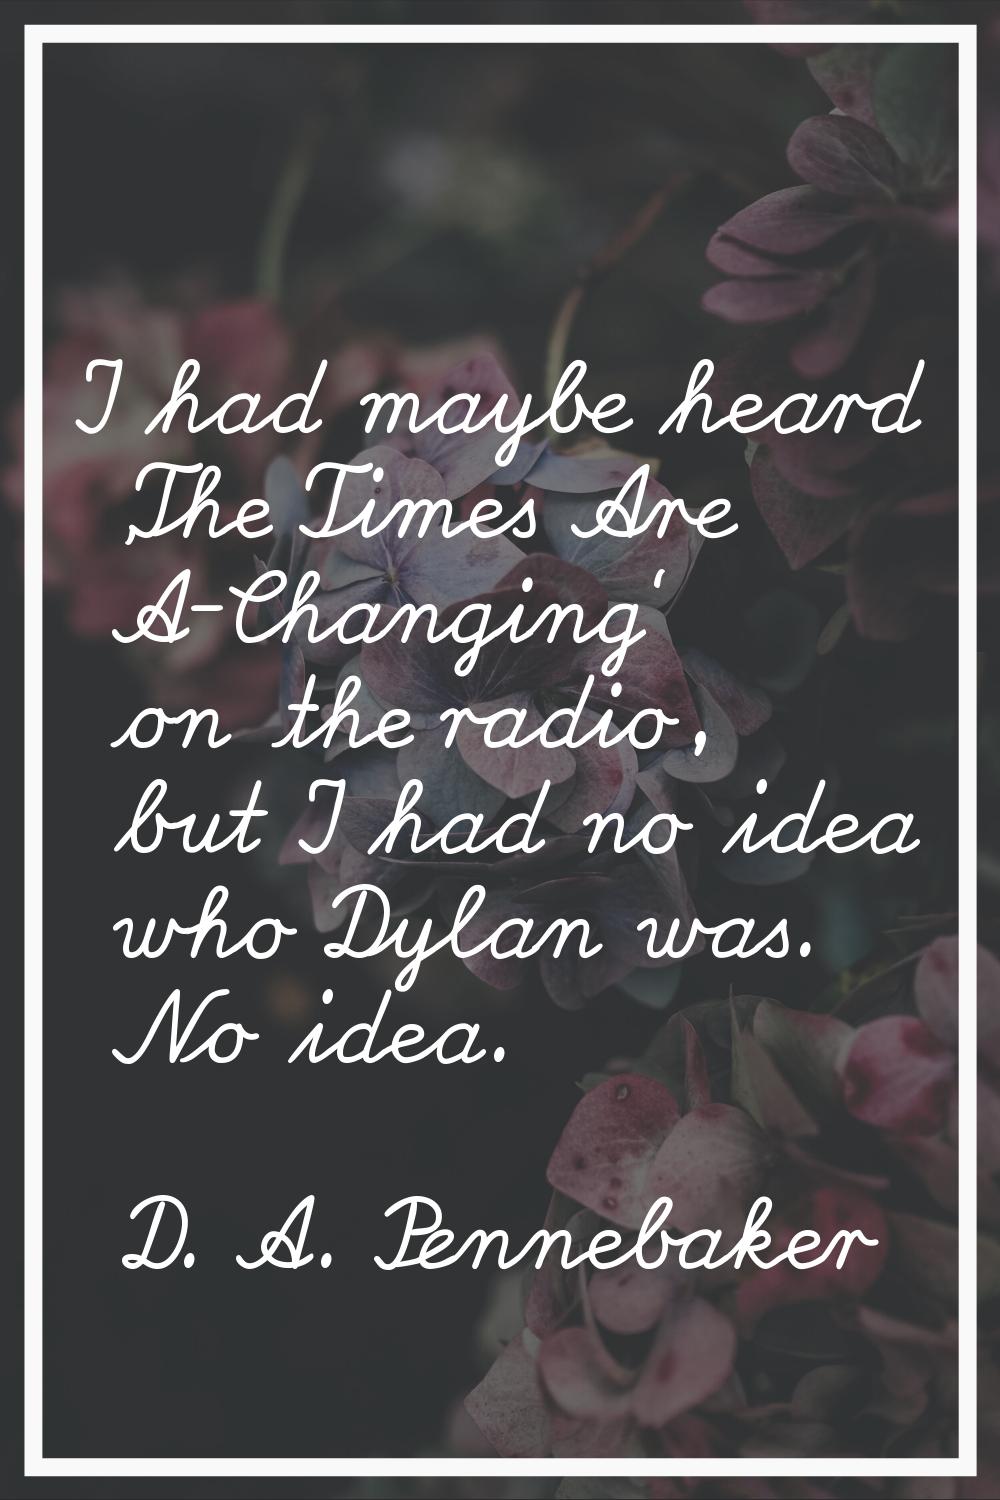 I had maybe heard 'The Times Are A-Changing' on the radio, but I had no idea who Dylan was. No idea